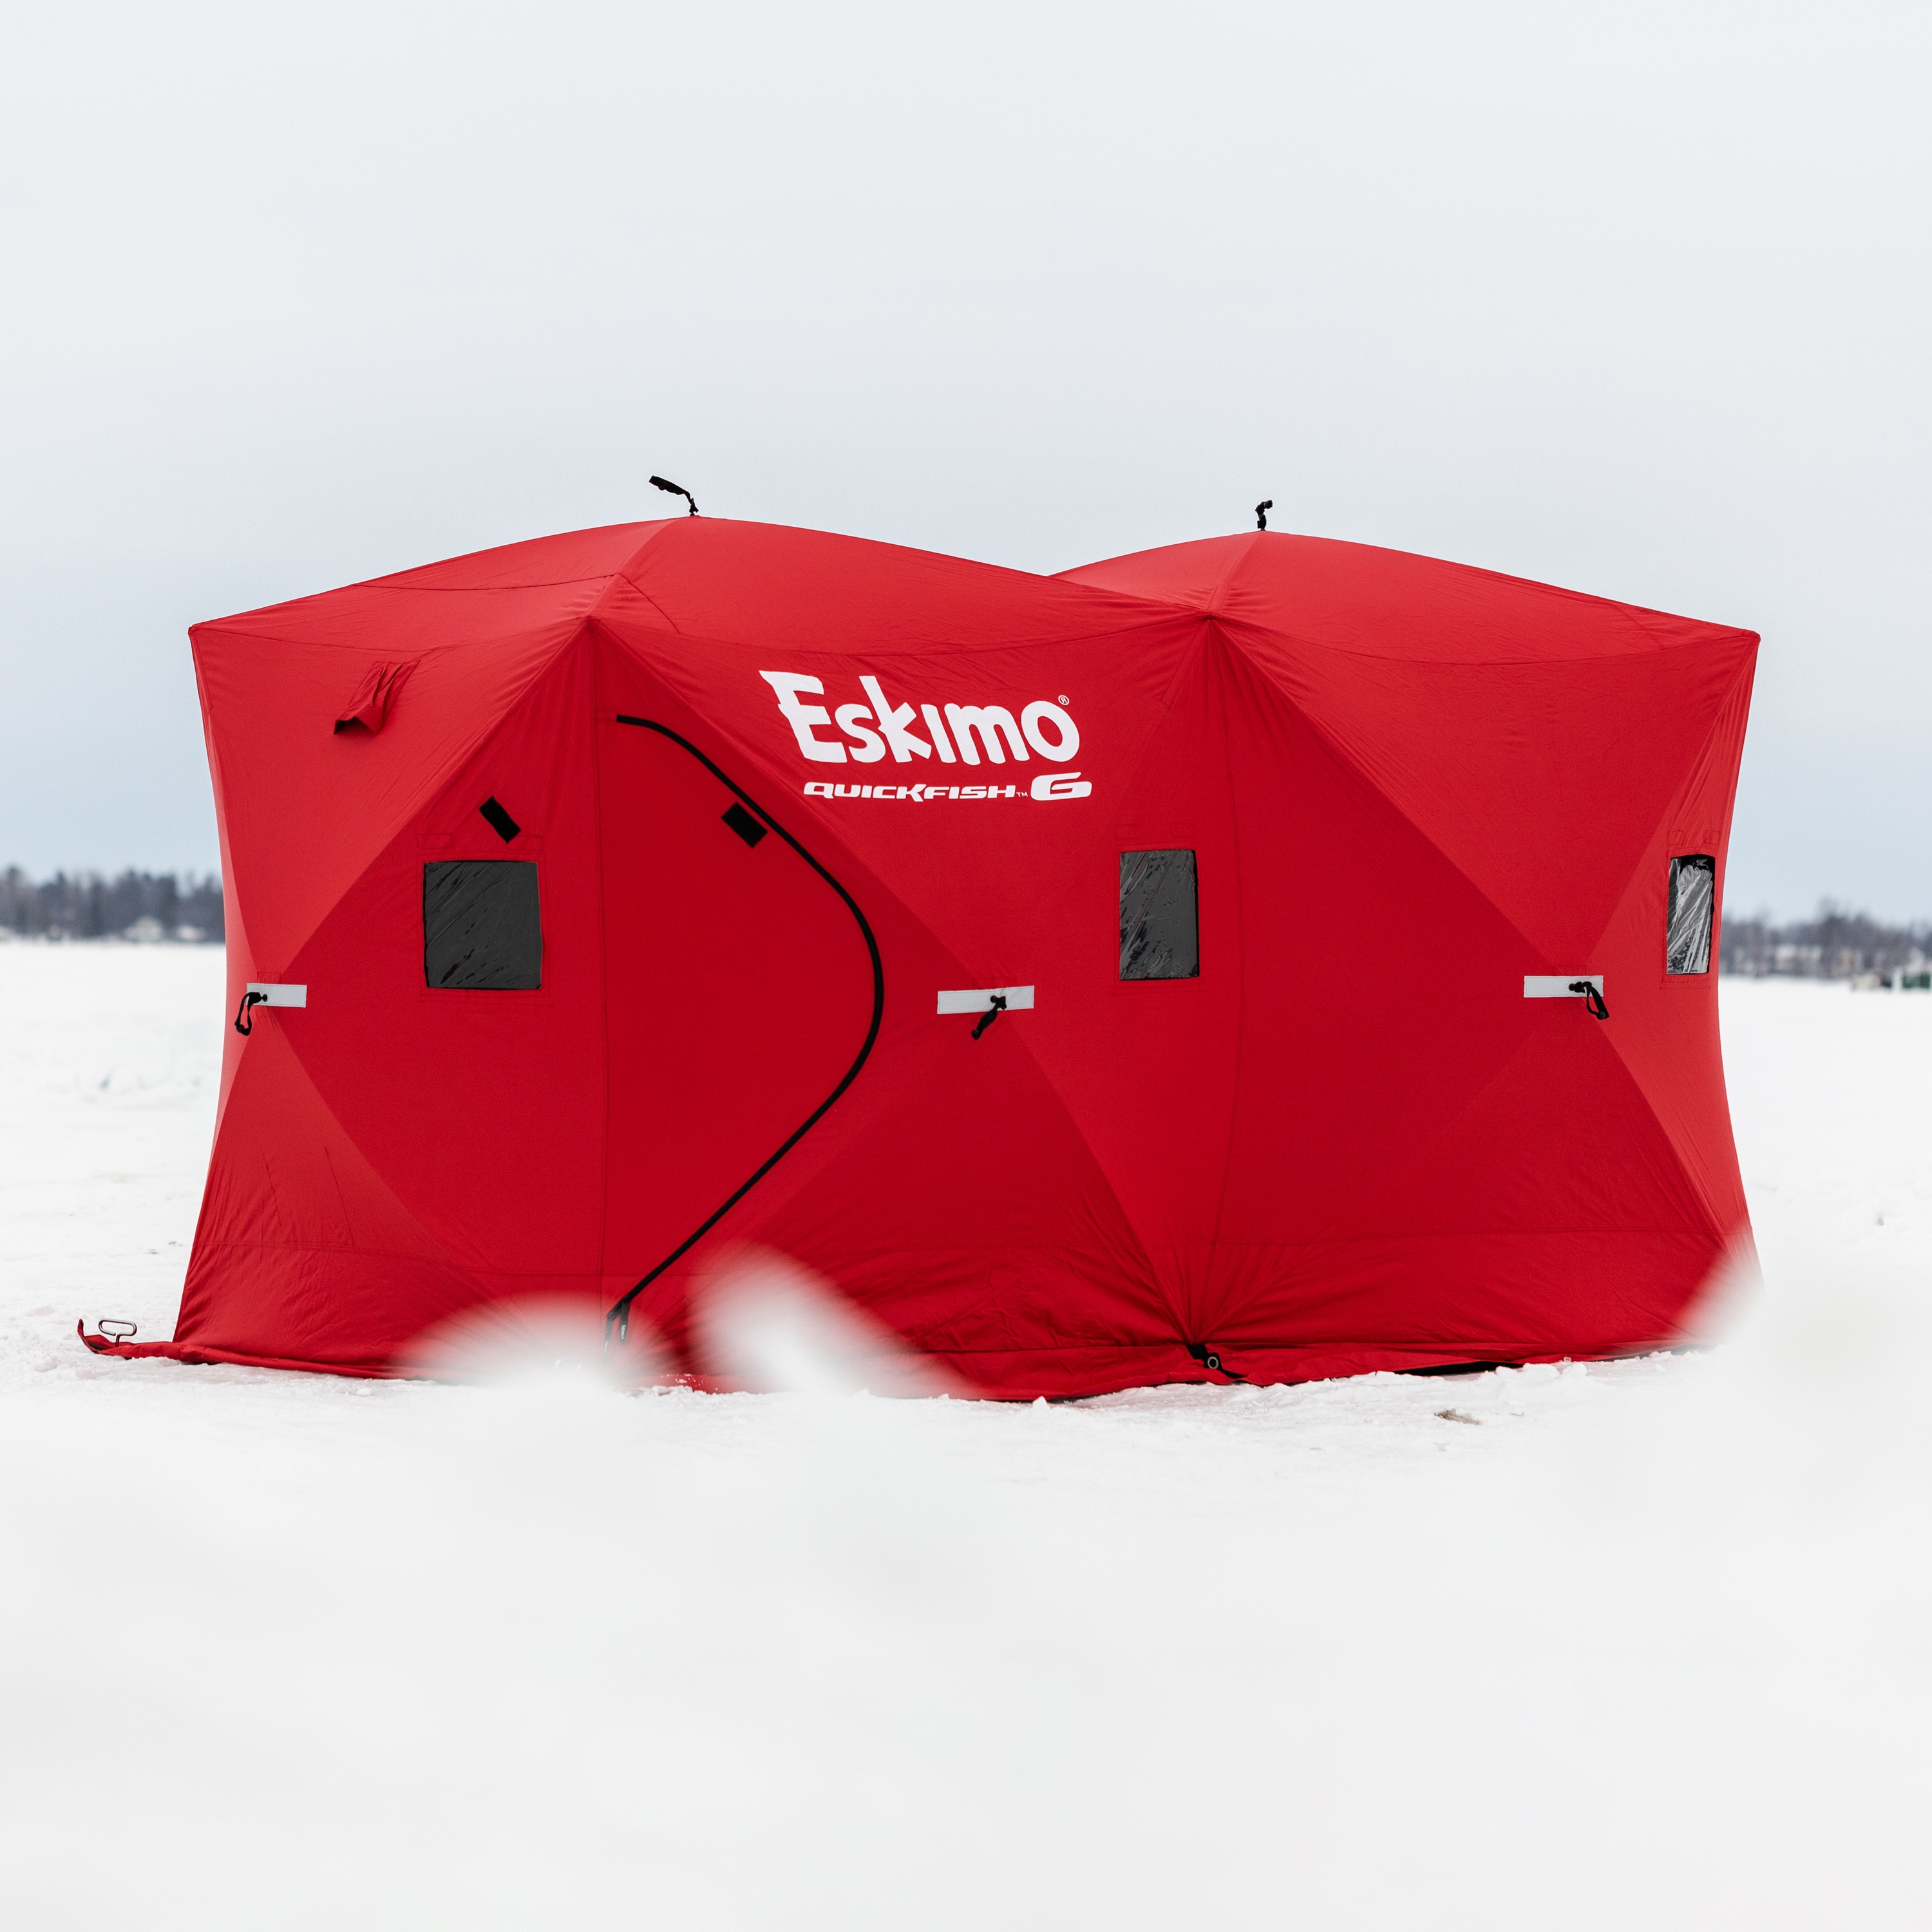 Eskimo QuickFish 6 Portable Ice Shelter Fishing Storage Cabinet in the  Fishing Equipment department at